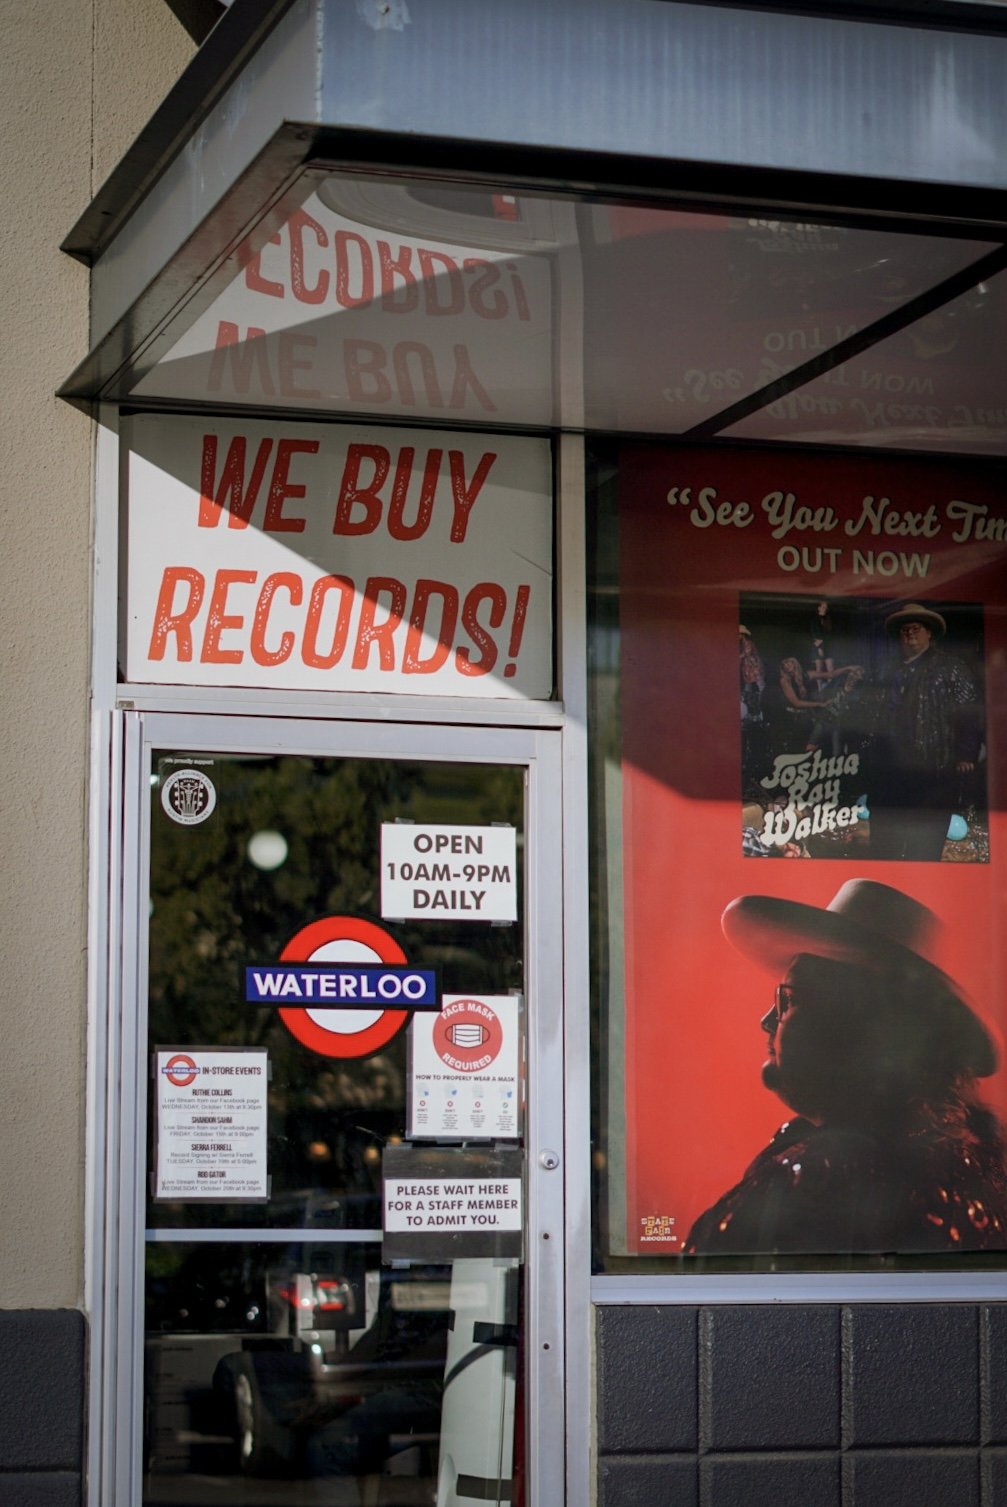  Waterloo Records storefront 